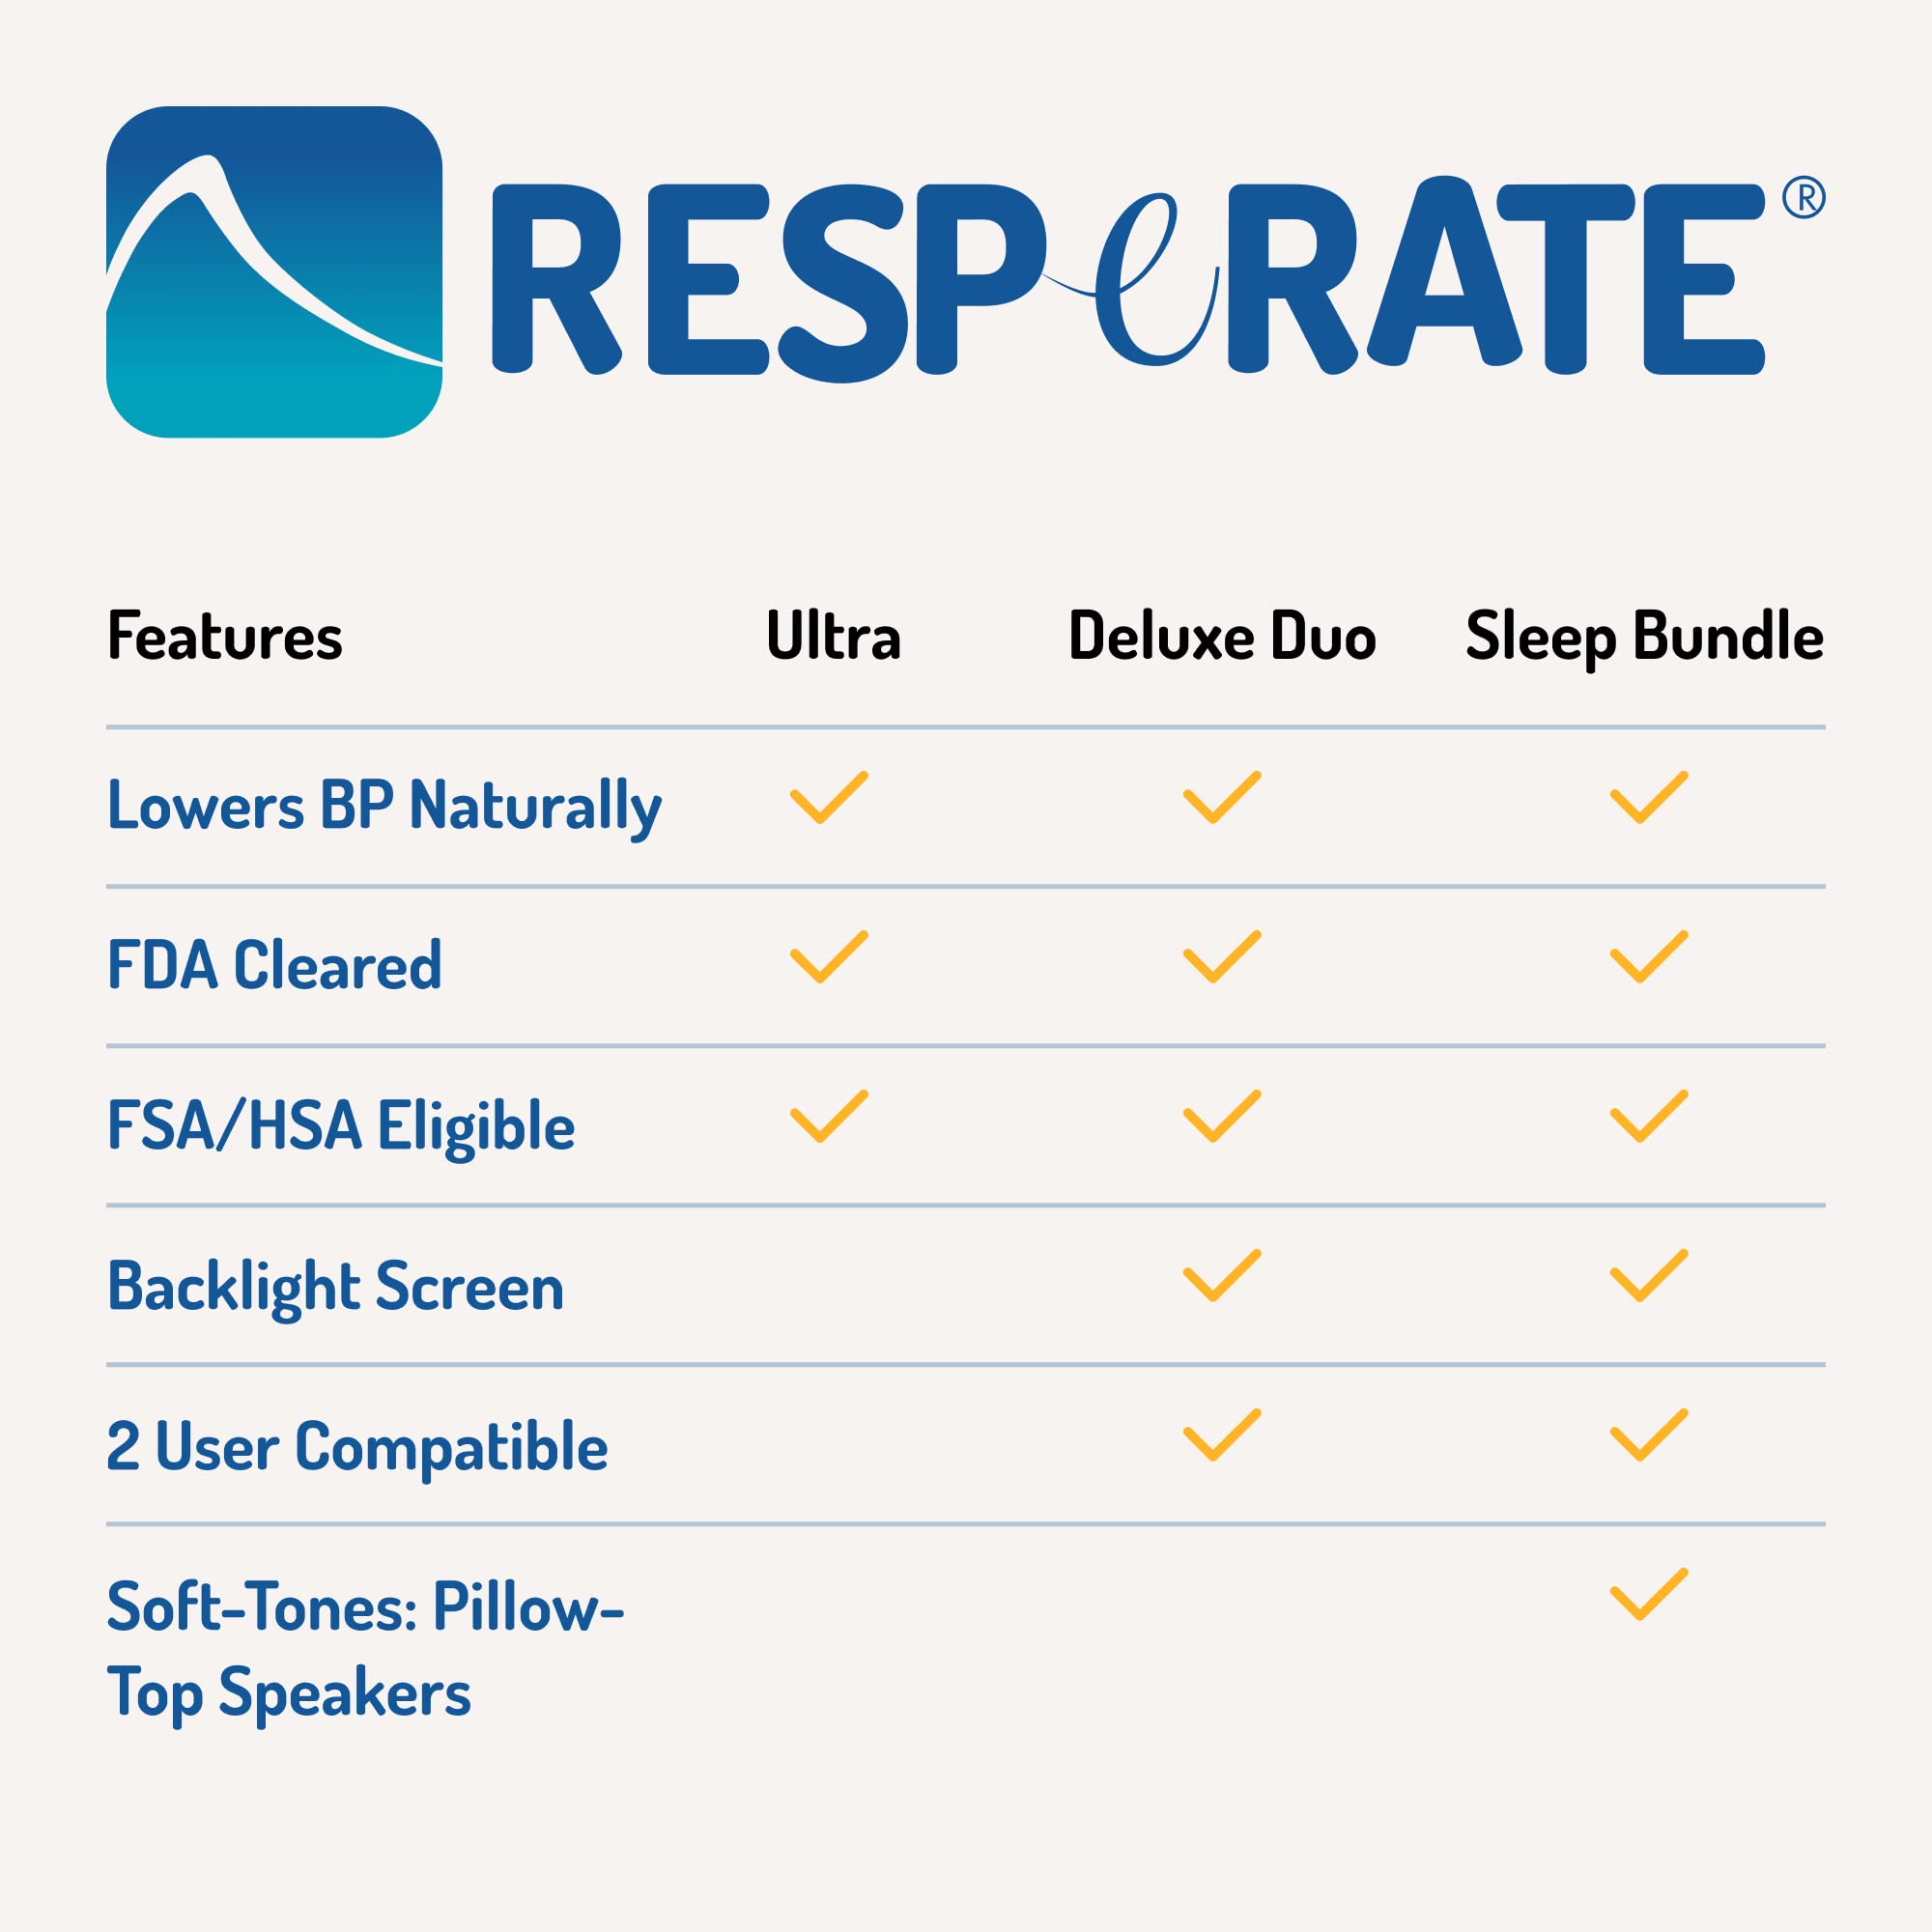 RESPeRATE Ultra + Hard Carry Case Bundle | Clinically Proven to Lower Blood Pressure Naturally | Non-Drug Medical Device | Doctor Recommended | Just 15 Minutes A Day | FSA/HSA Eligible Product